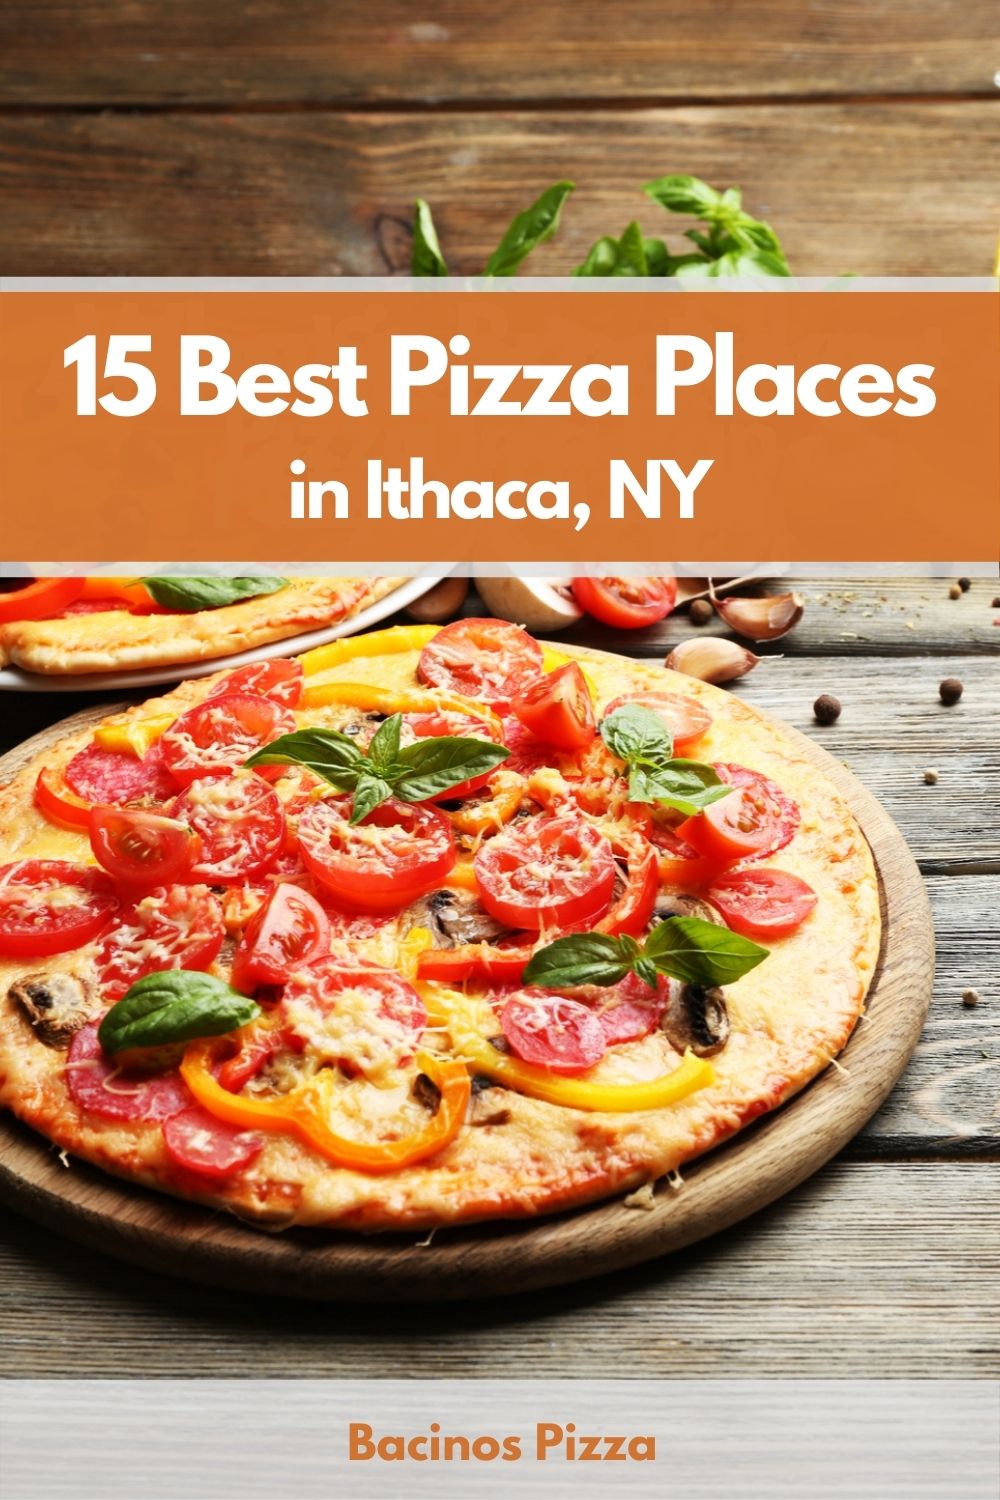 15 Best Pizza Places in Ithaca, NY pin 2